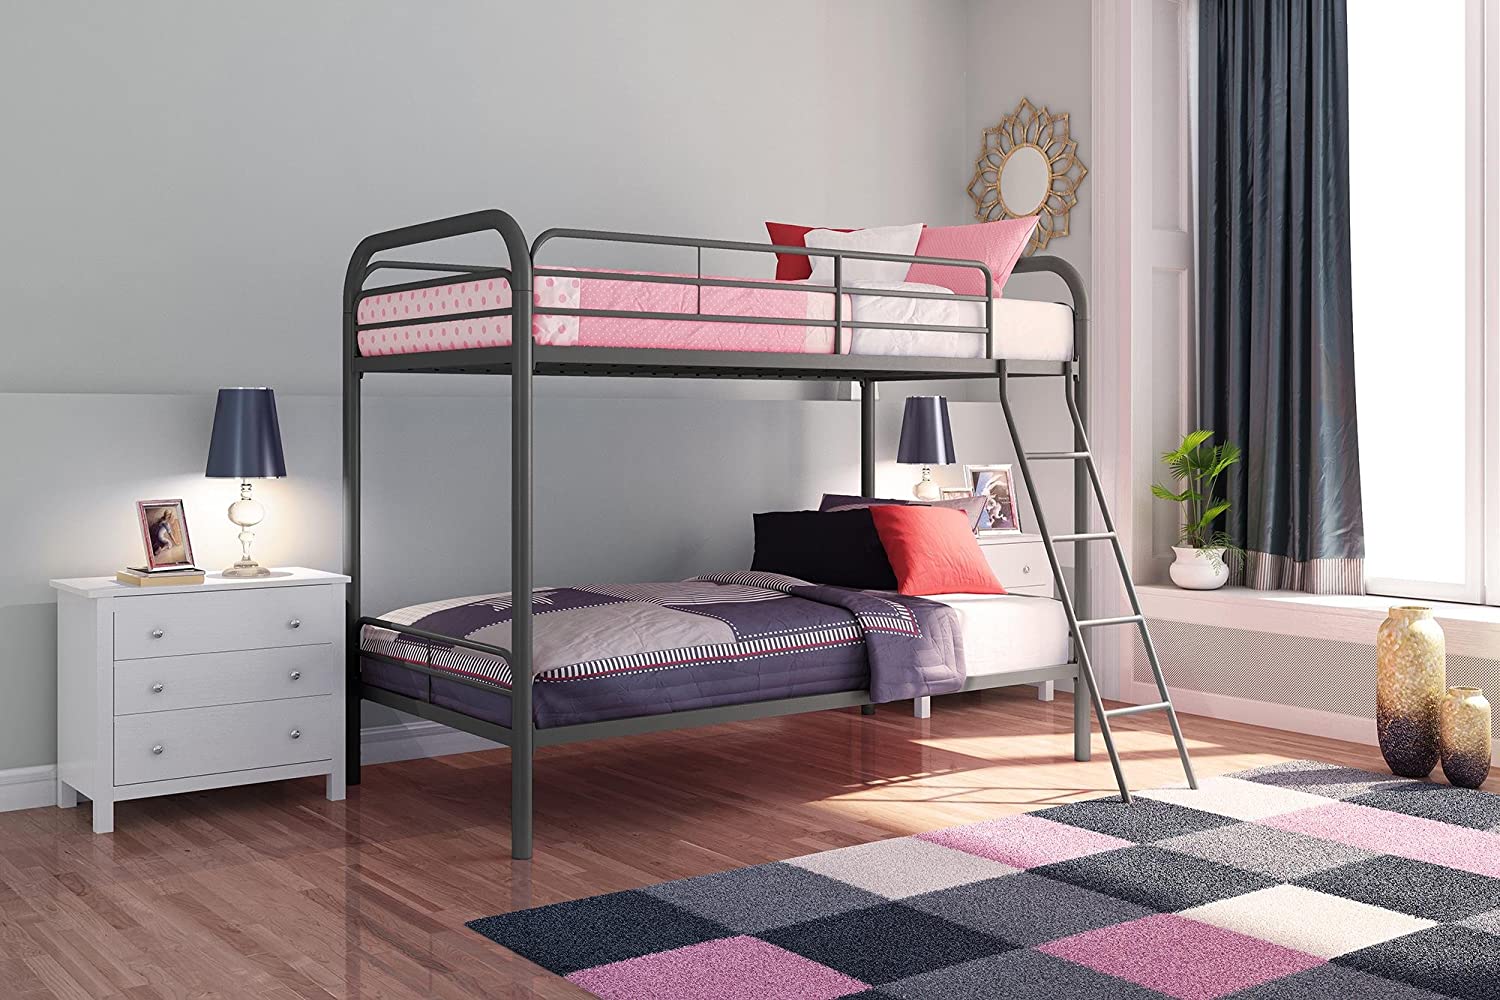 7 Best Kids Bunk Beds Under $200 2022 - Buying Guide 1